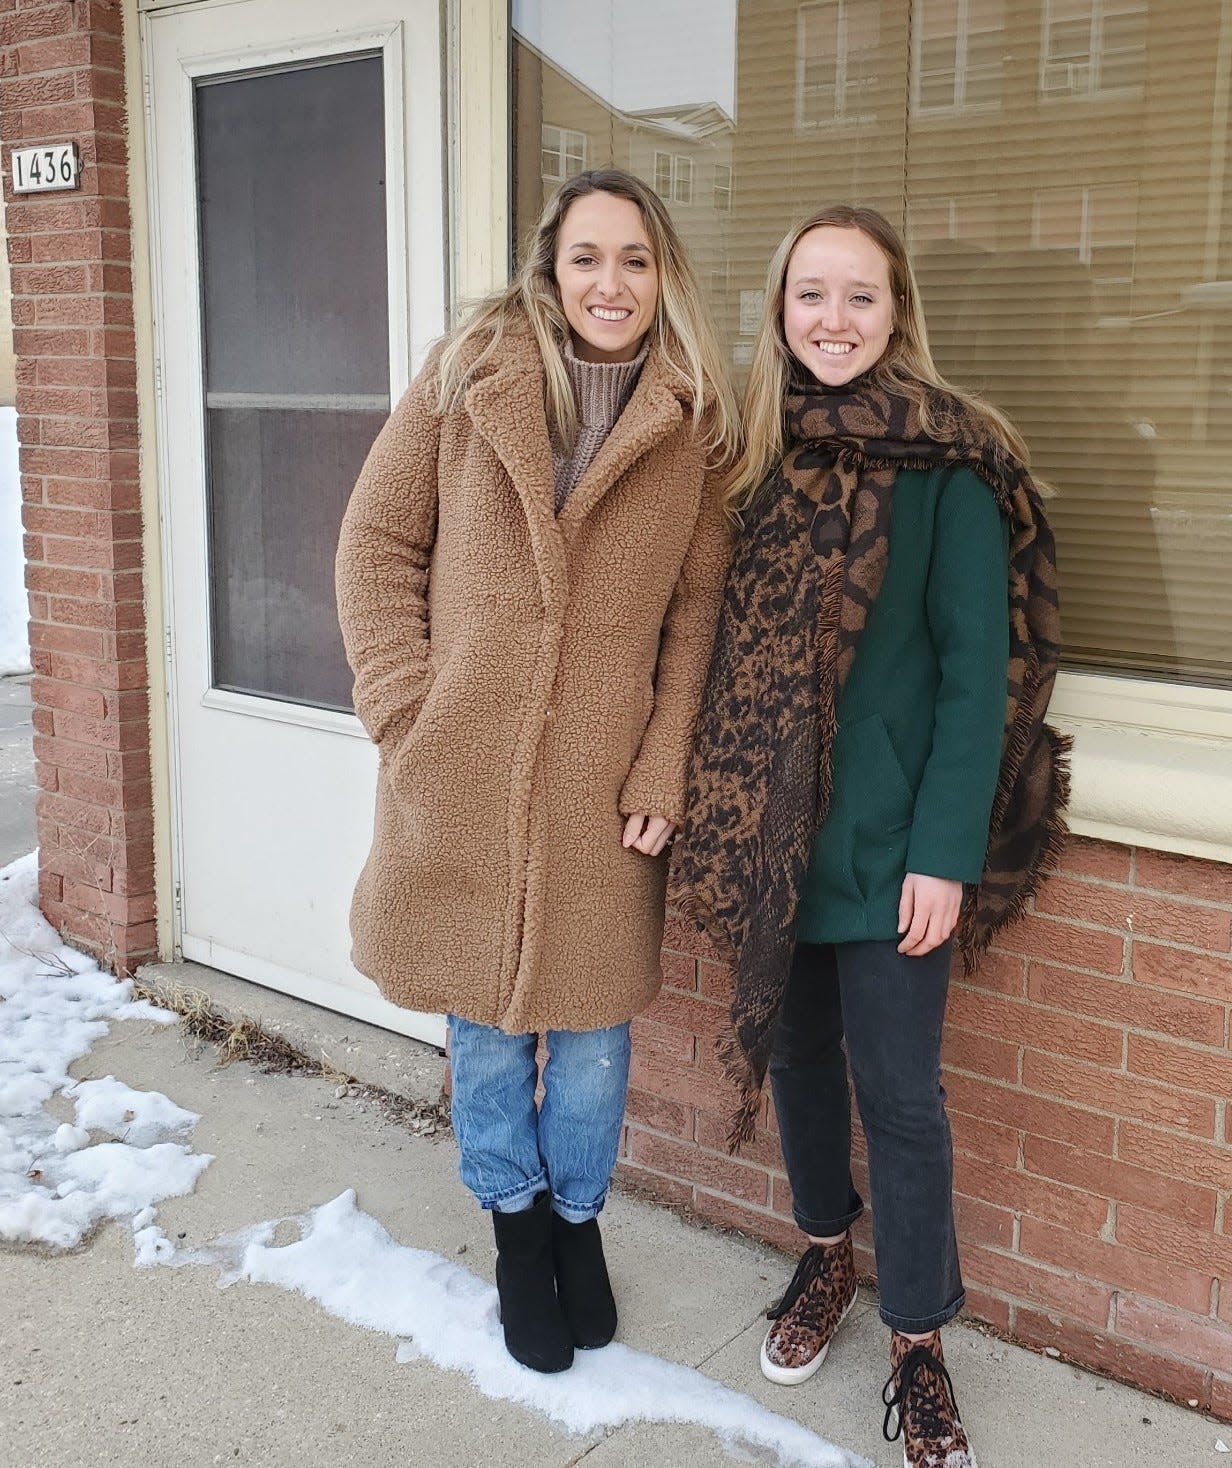 The Schneider sisters of West Allis, Samantha (left) and Skylar, both professional cyclists, are shown in front of the building that will house The Bread Pedalers, a new bakery and café they're planning to open in spring 2022 at 1436 S. 92nd St. in West Allis.